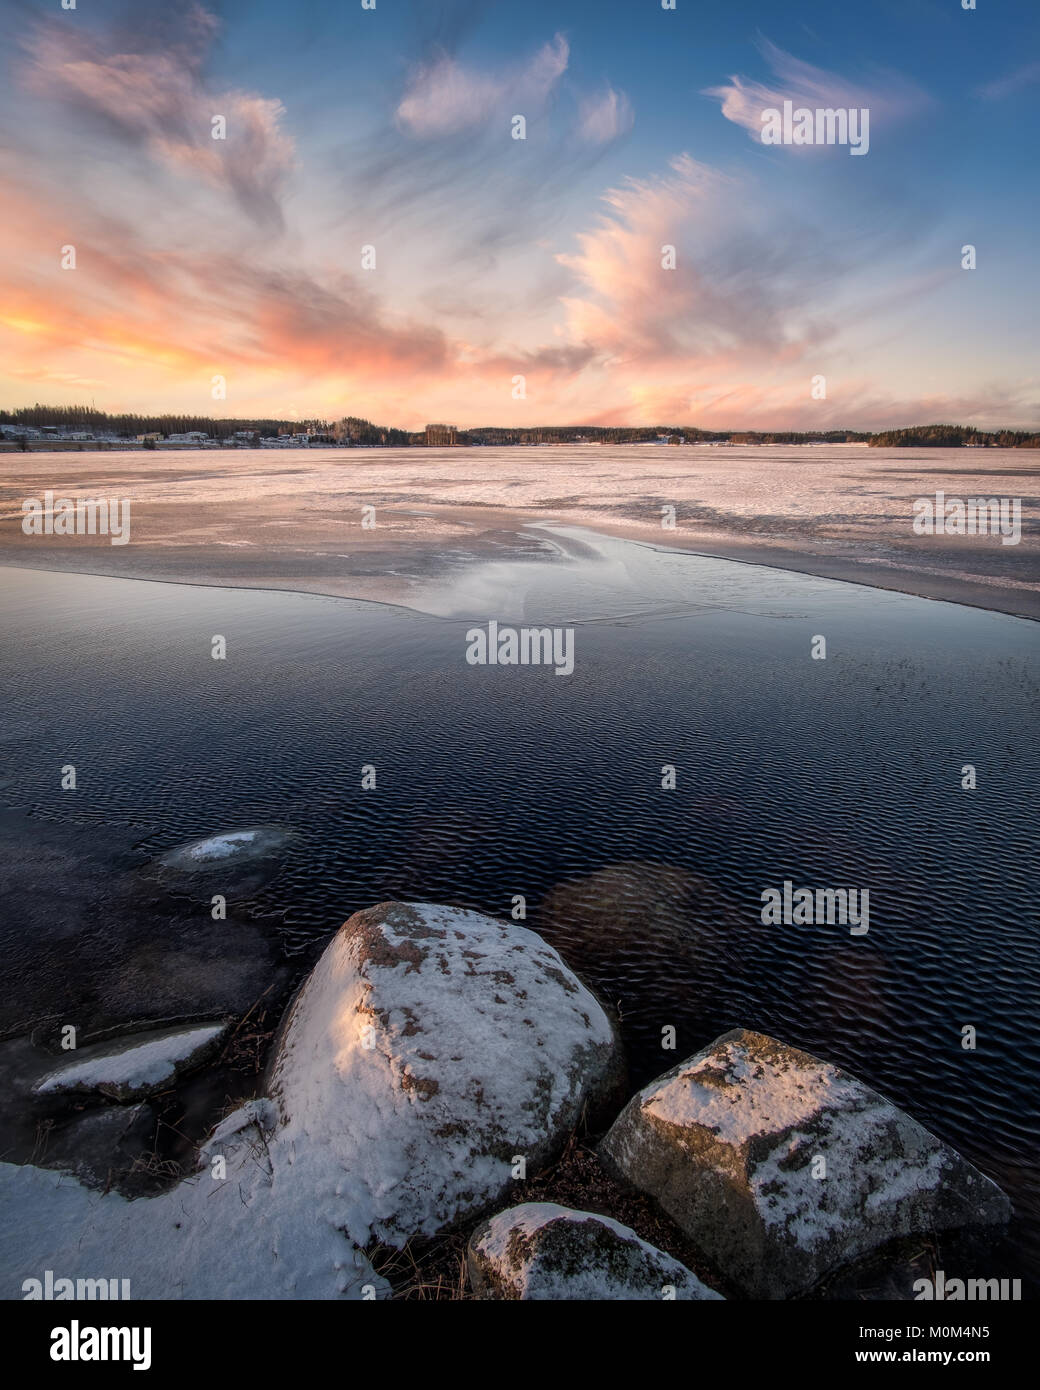 Scenic landscape with sunset and freezing lake at winter evening in FInland Stock Photo